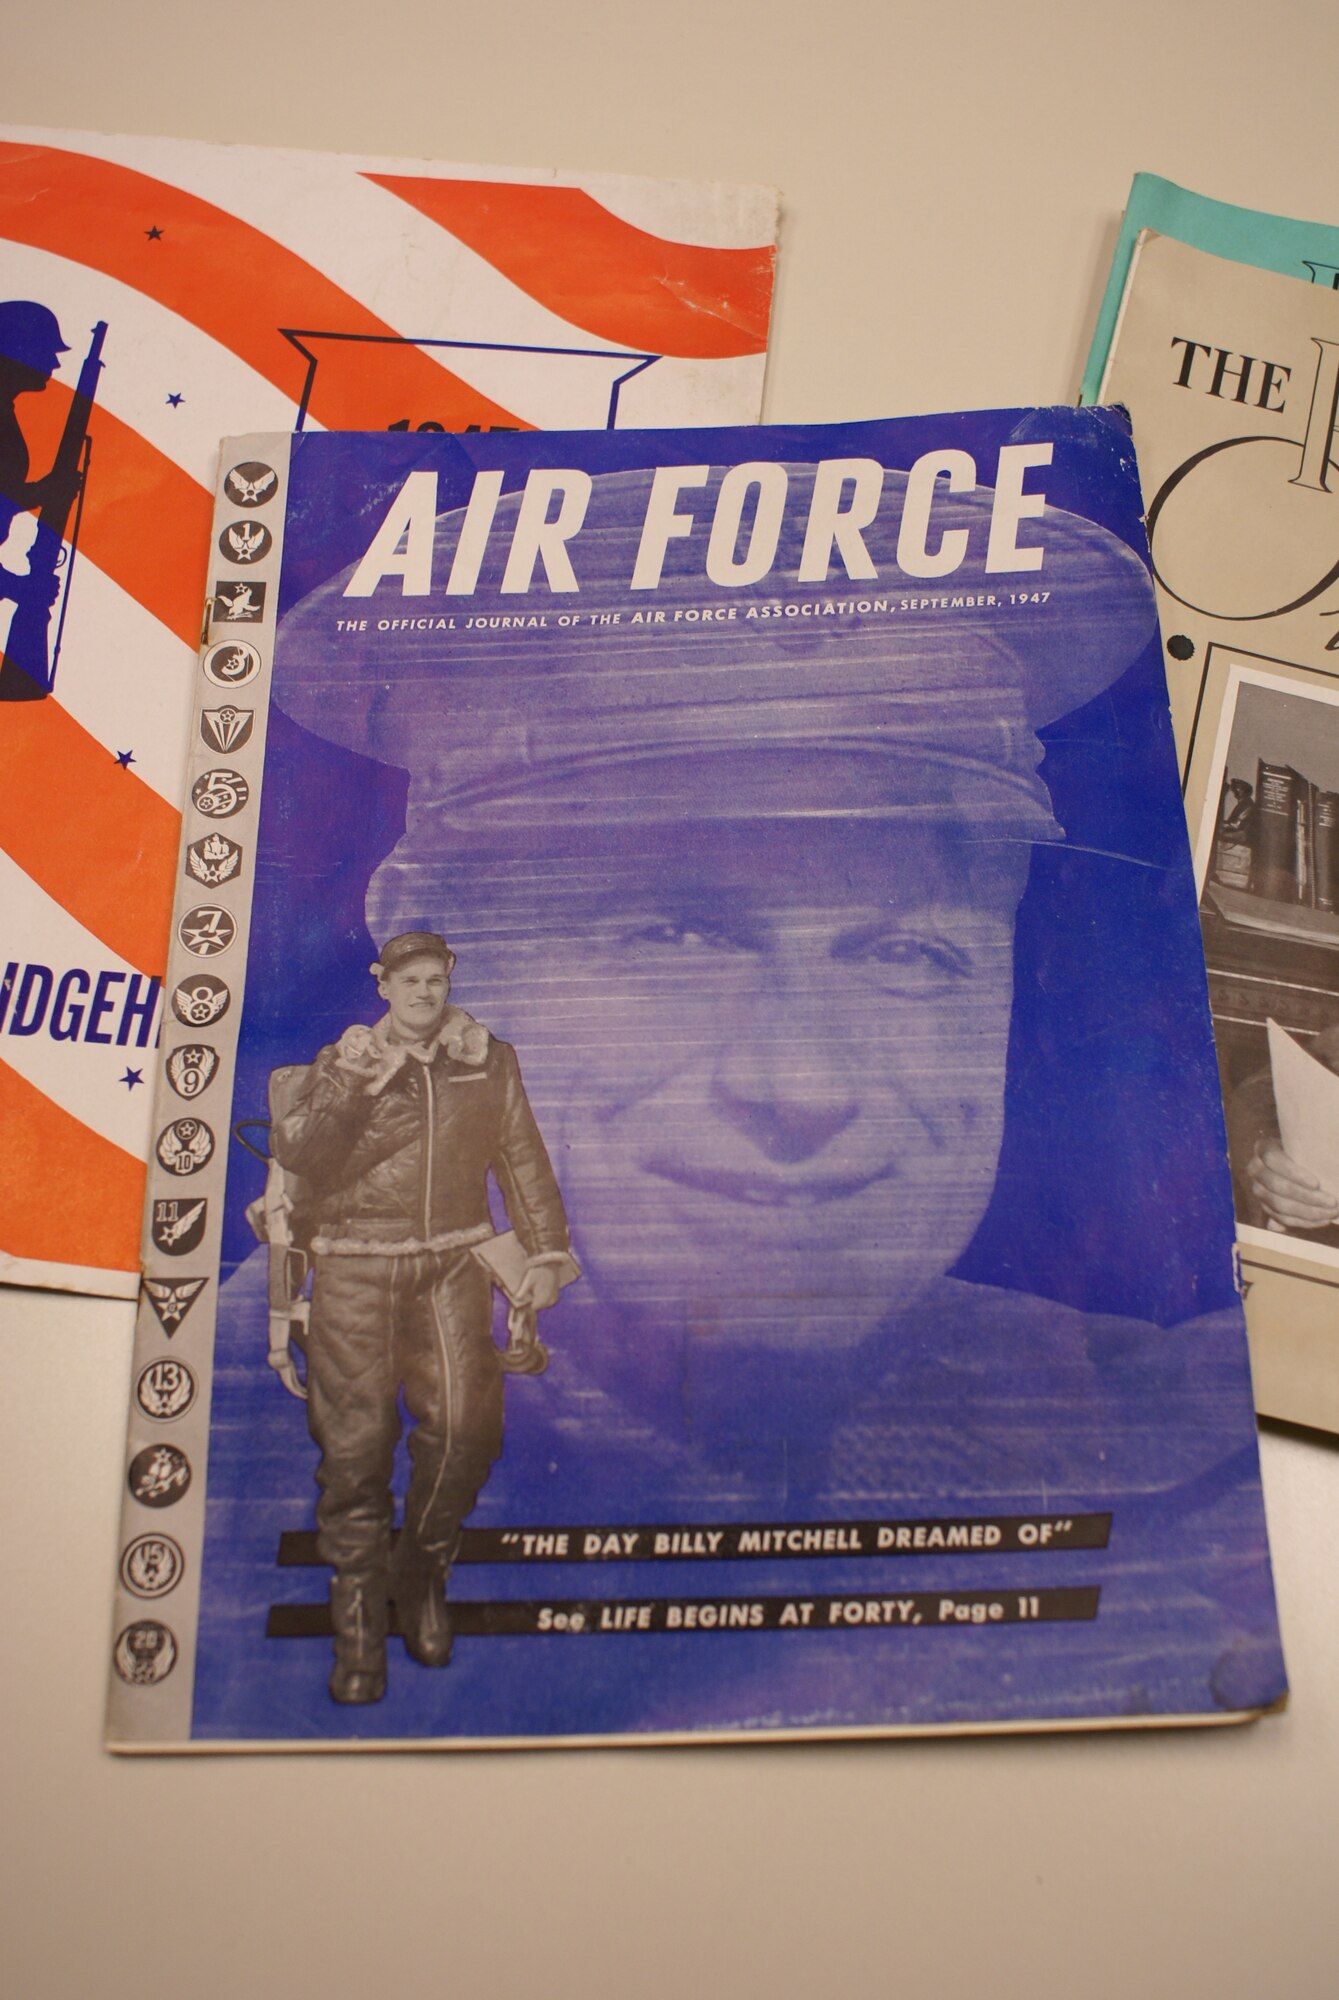 Documents recently discovered under the McChord Chapel include this September, 1947 edition of Air Force – “the official journal of the Air Force Association”. (U.S. Air Force photo/Staff Sgt. Eric Burks)